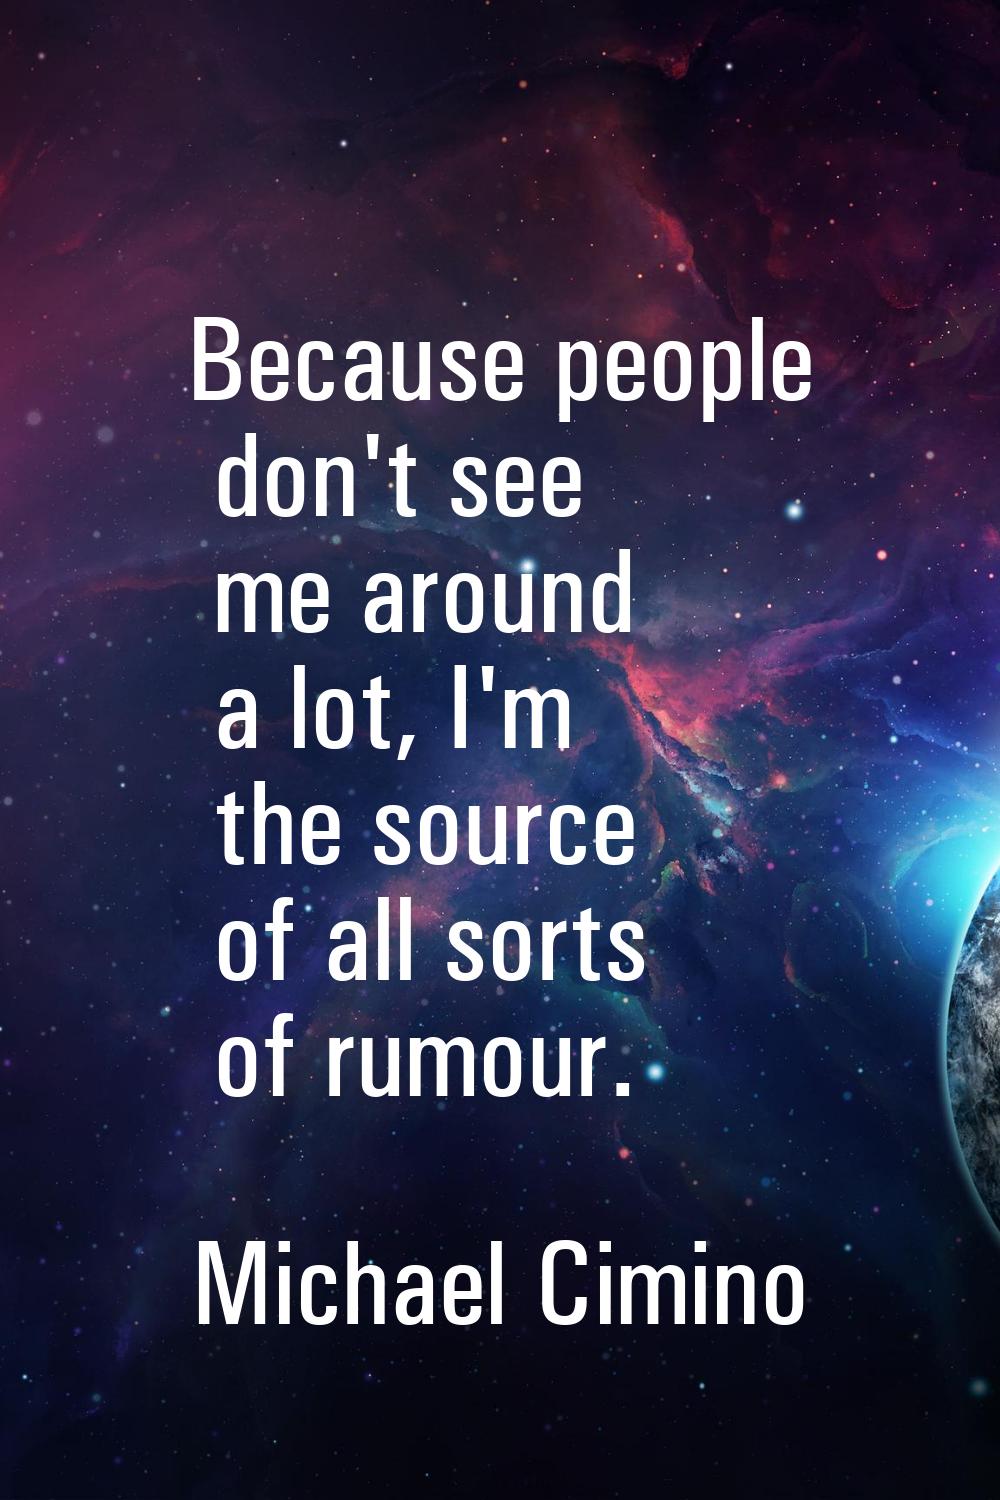 Because people don't see me around a lot, I'm the source of all sorts of rumour.